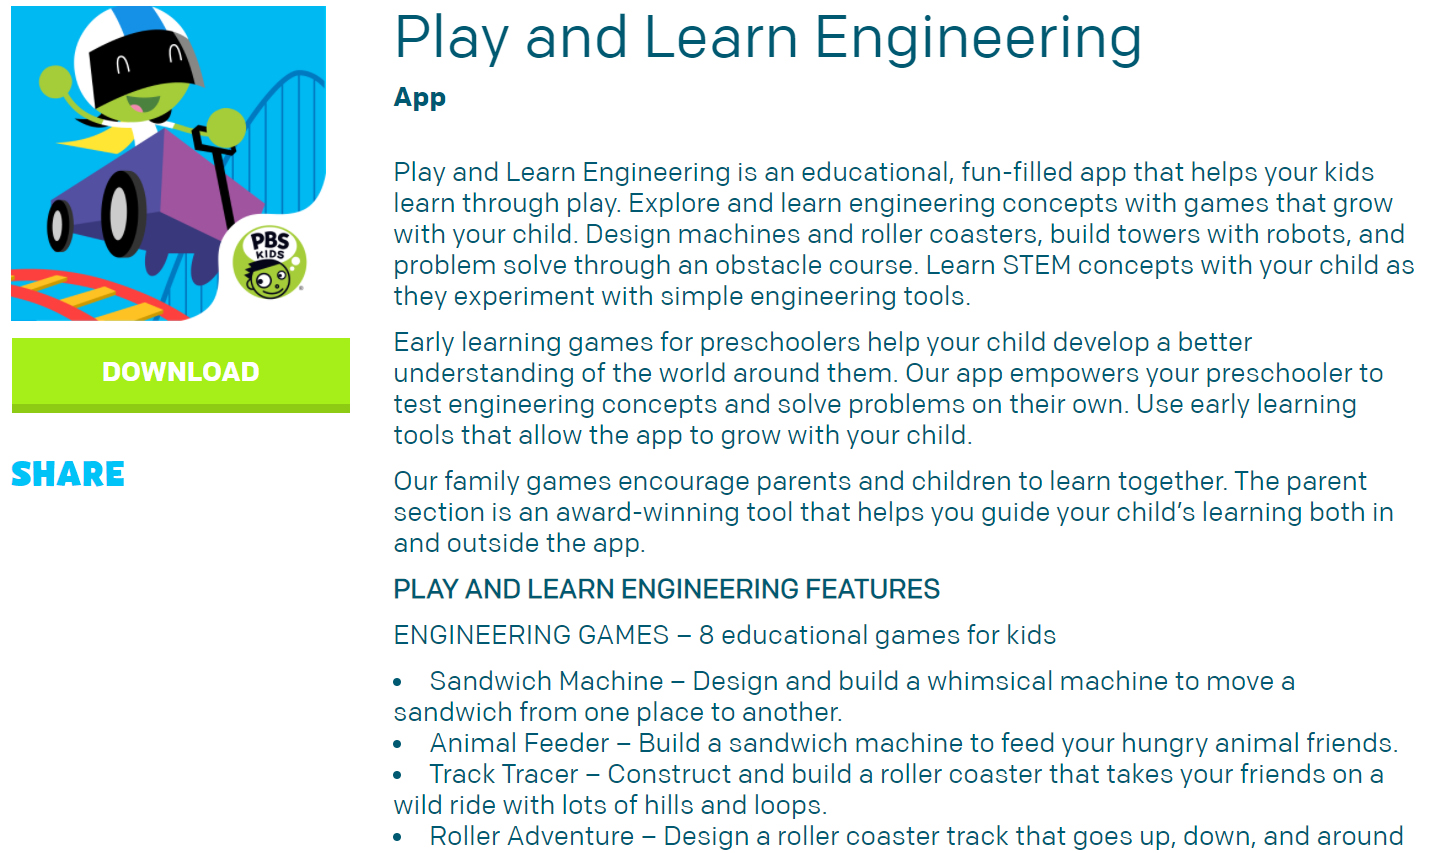 Play and Learn Engineering by PBS Kids